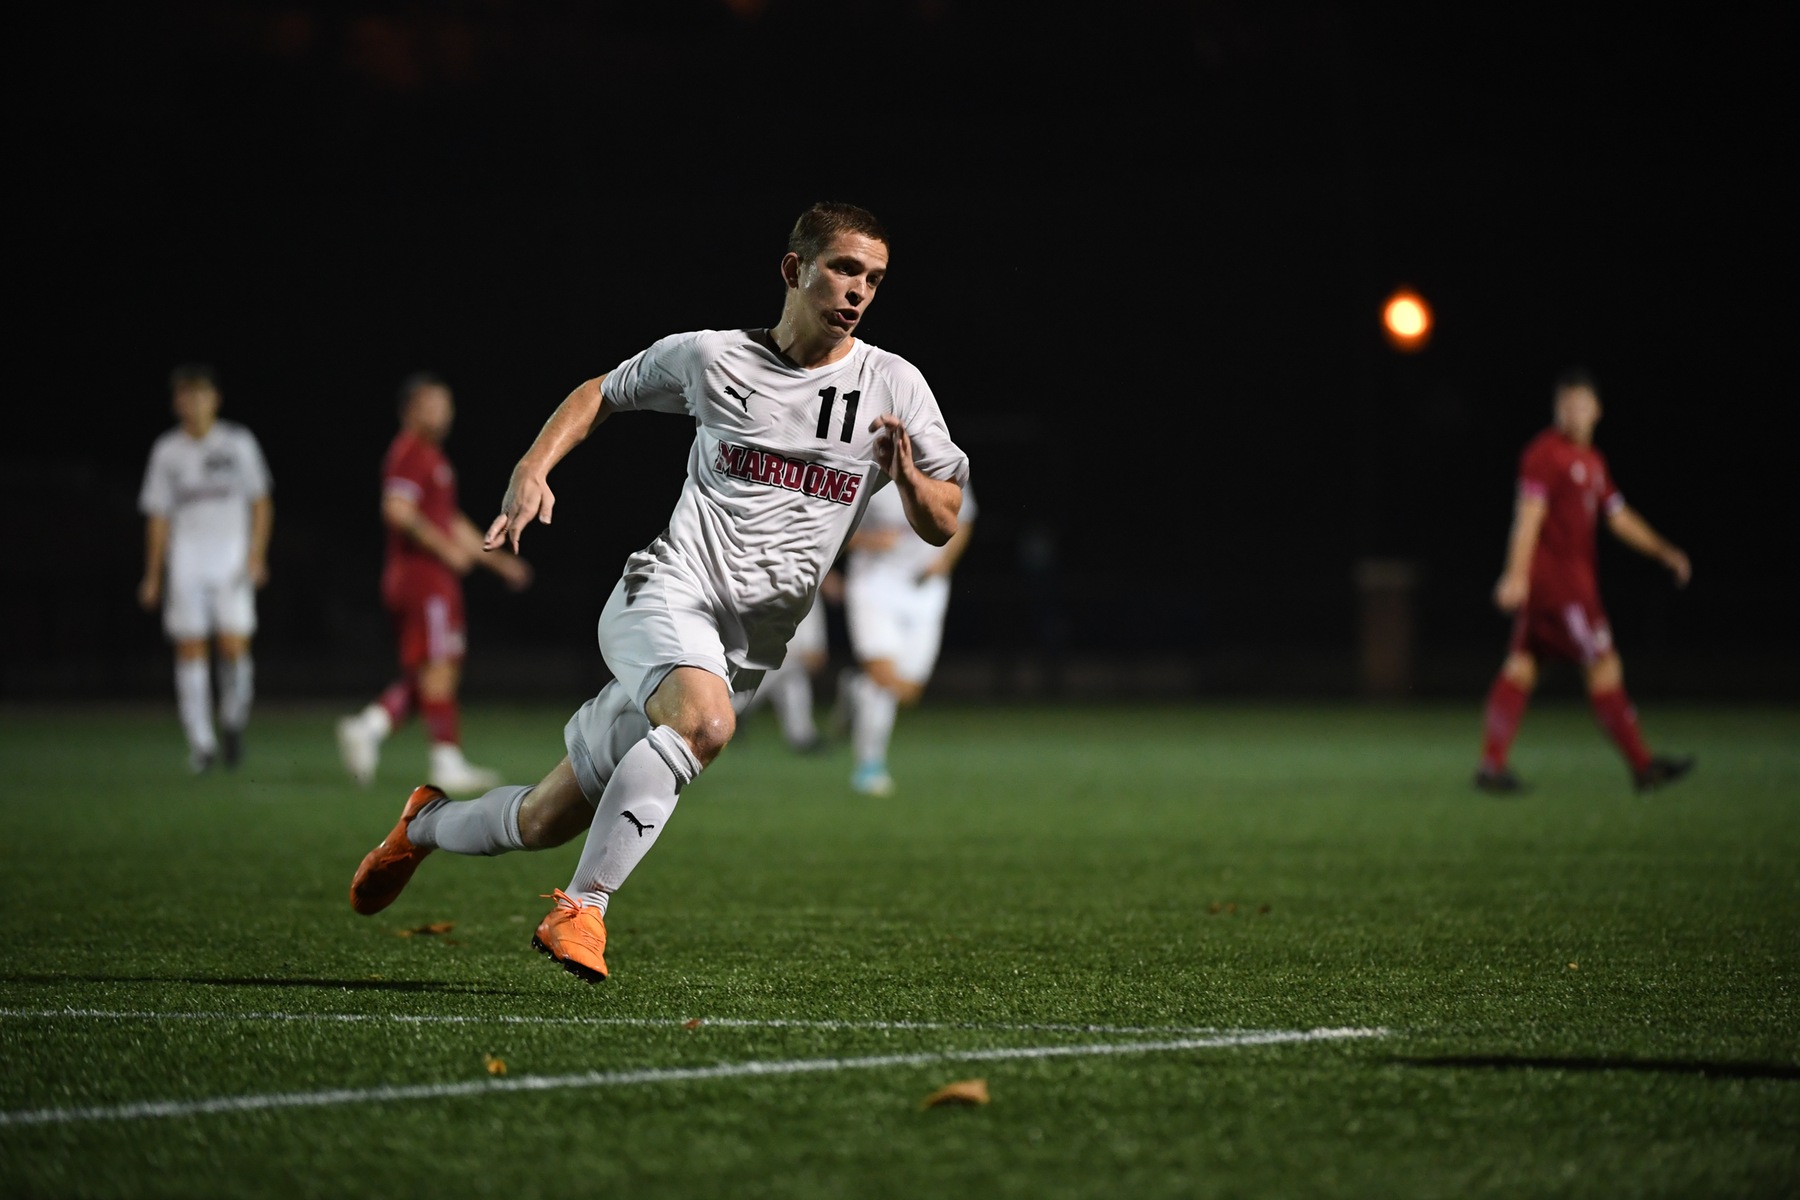 Isaac Wolf scored a goal and added an assist to lead third-seeded Roanoke to a 2-0 win over sixth-seeded Guilford in the Quarterfinals of the 2019 ODAC Men’s Soccer Tournament.